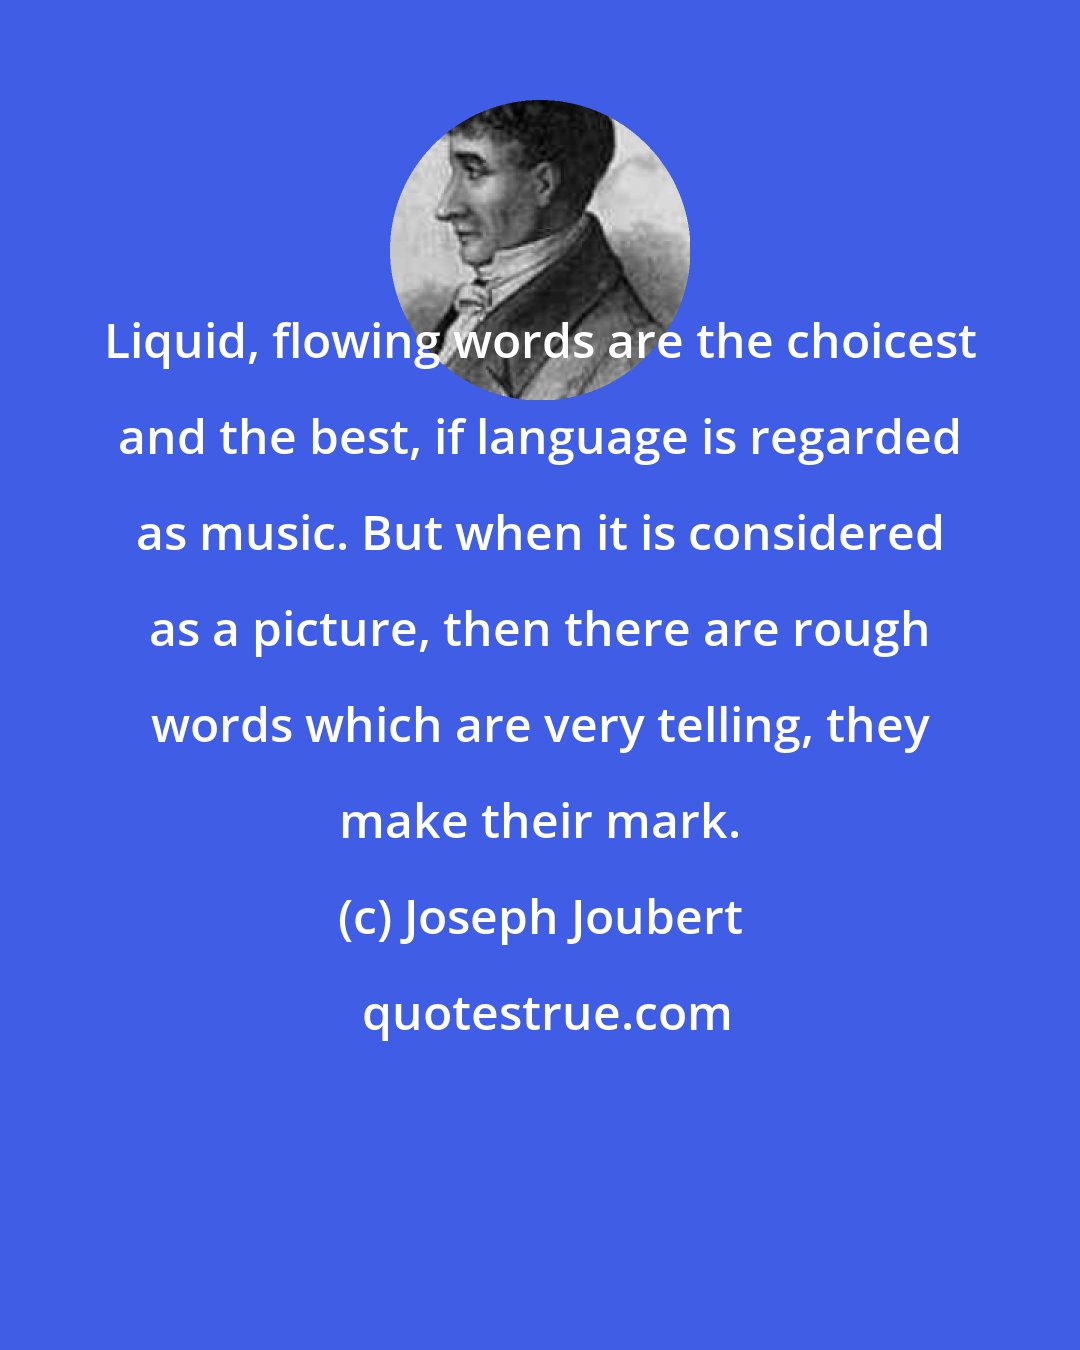 Joseph Joubert: Liquid, flowing words are the choicest and the best, if language is regarded as music. But when it is considered as a picture, then there are rough words which are very telling, they make their mark.